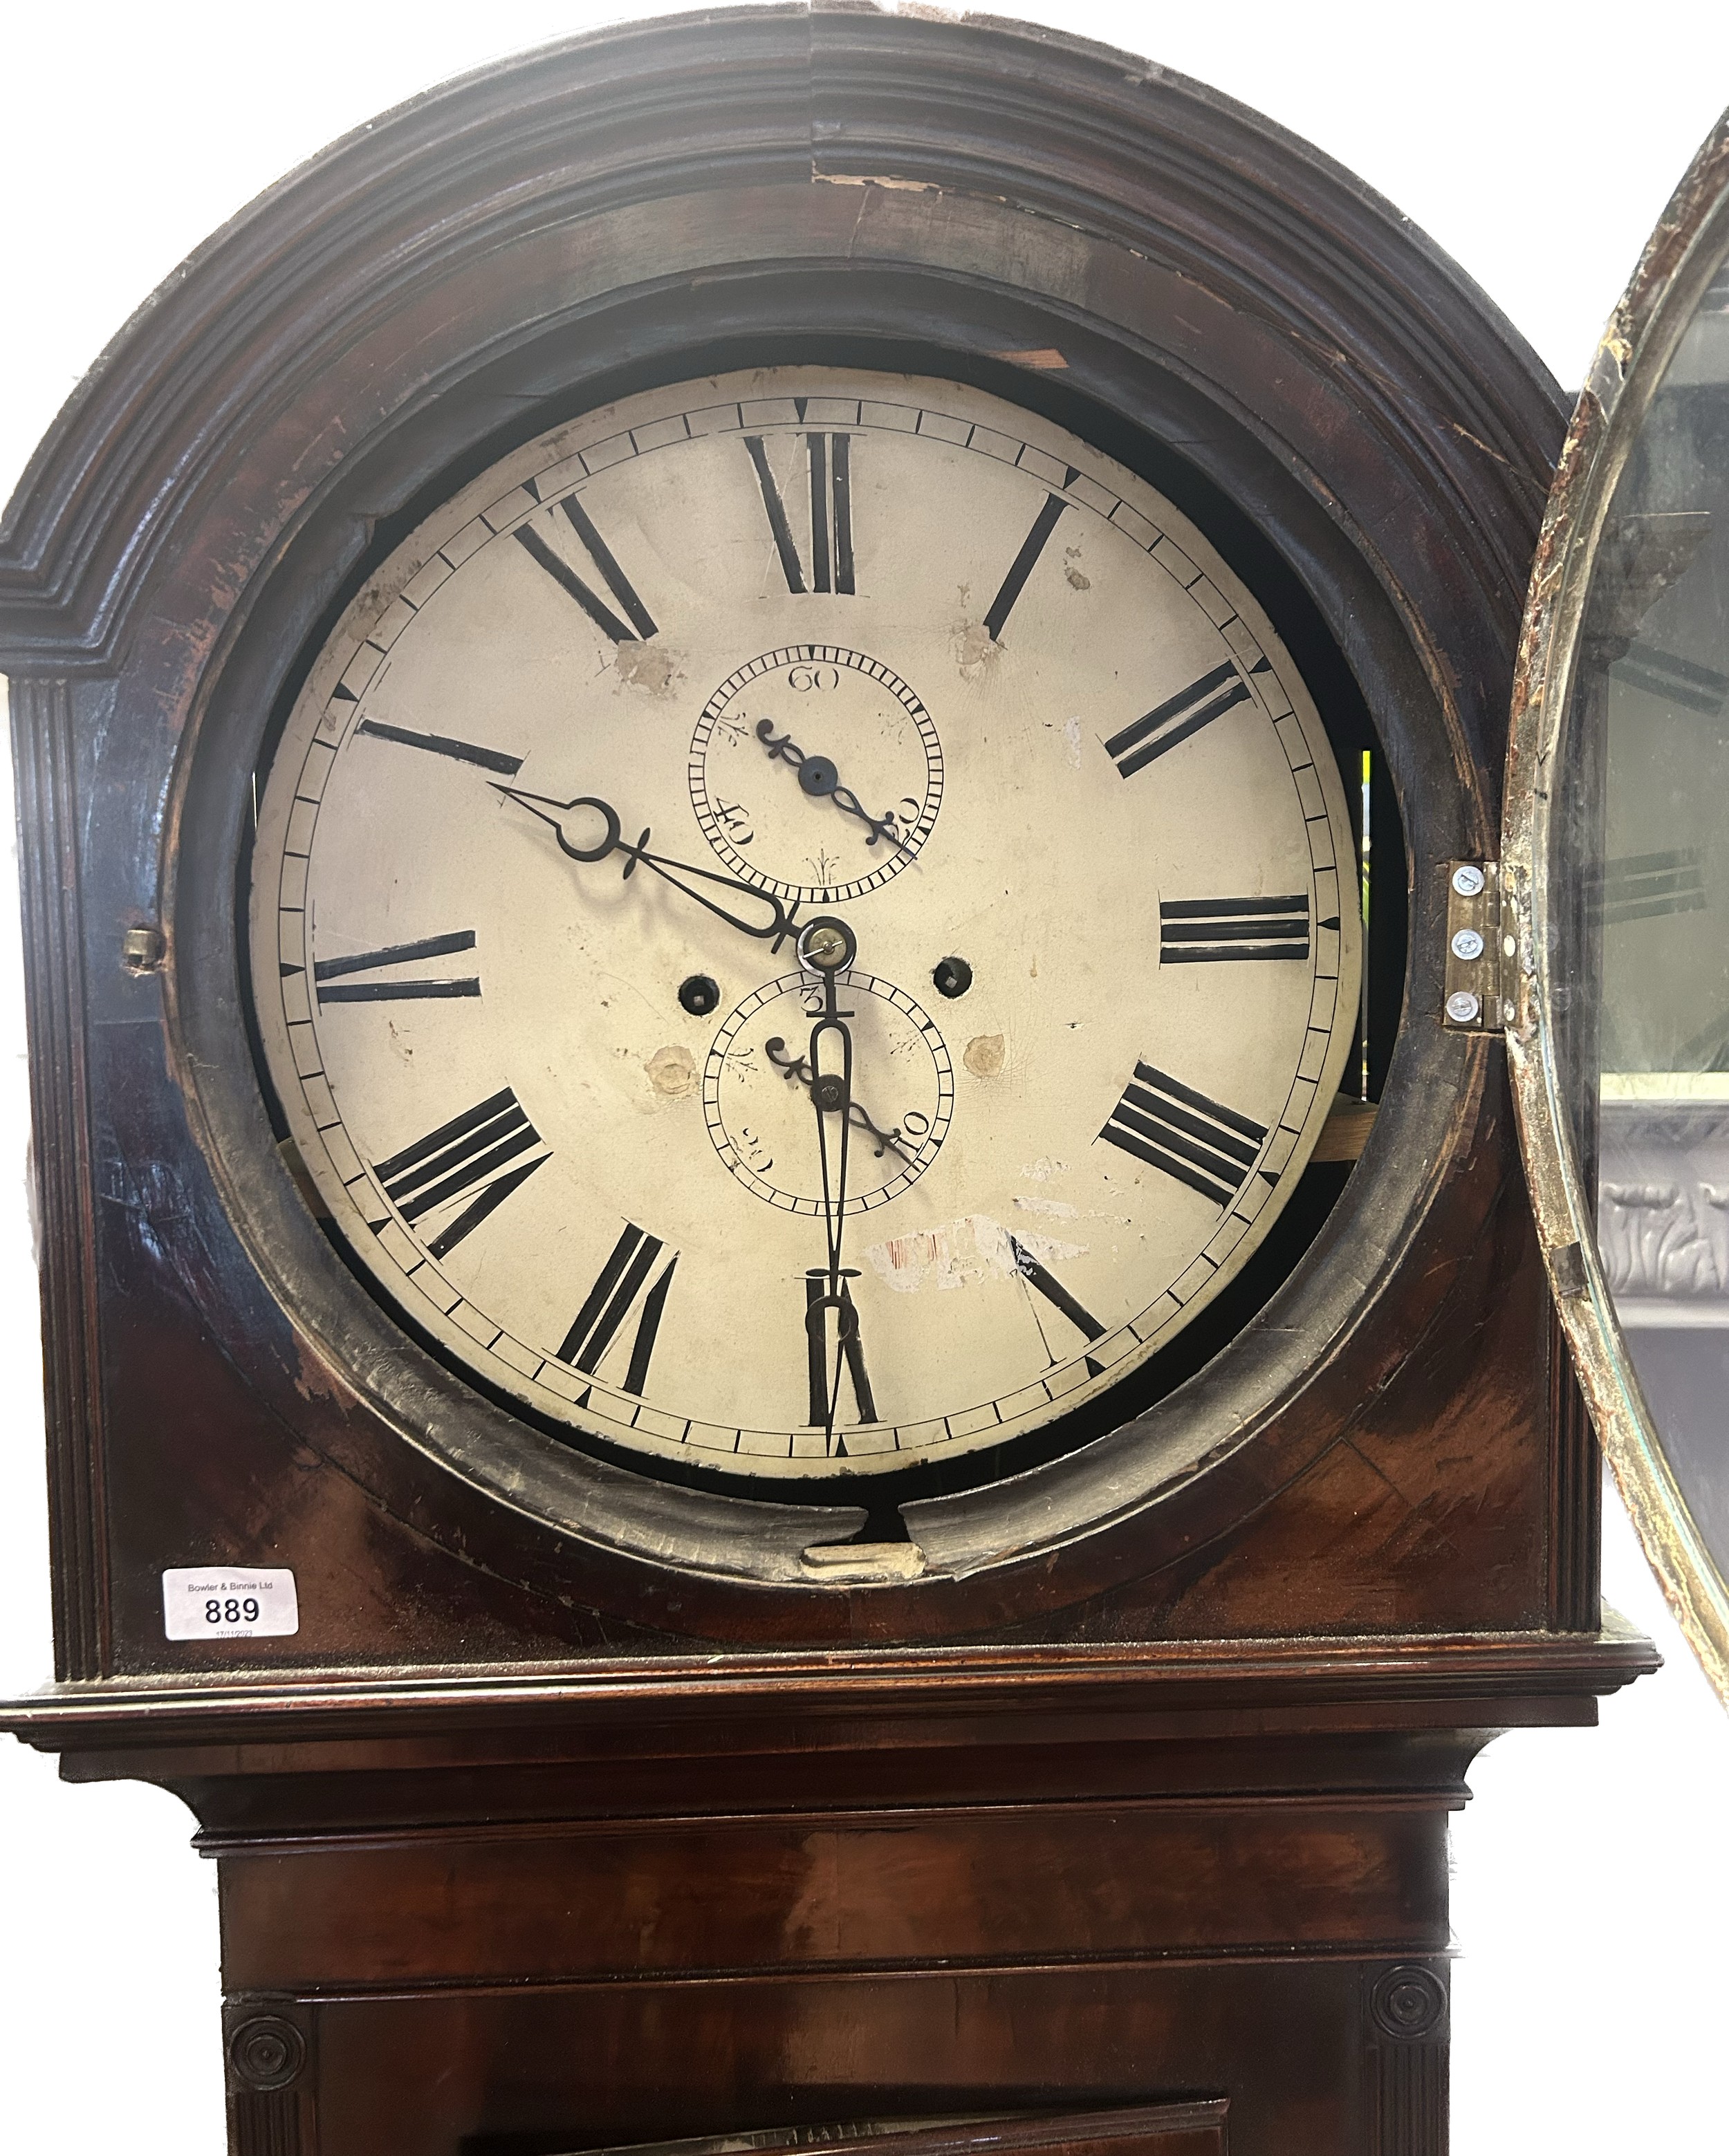 19th century dome top grandfather clock; comes with weights and pendulum. [204cm high] - Image 3 of 4